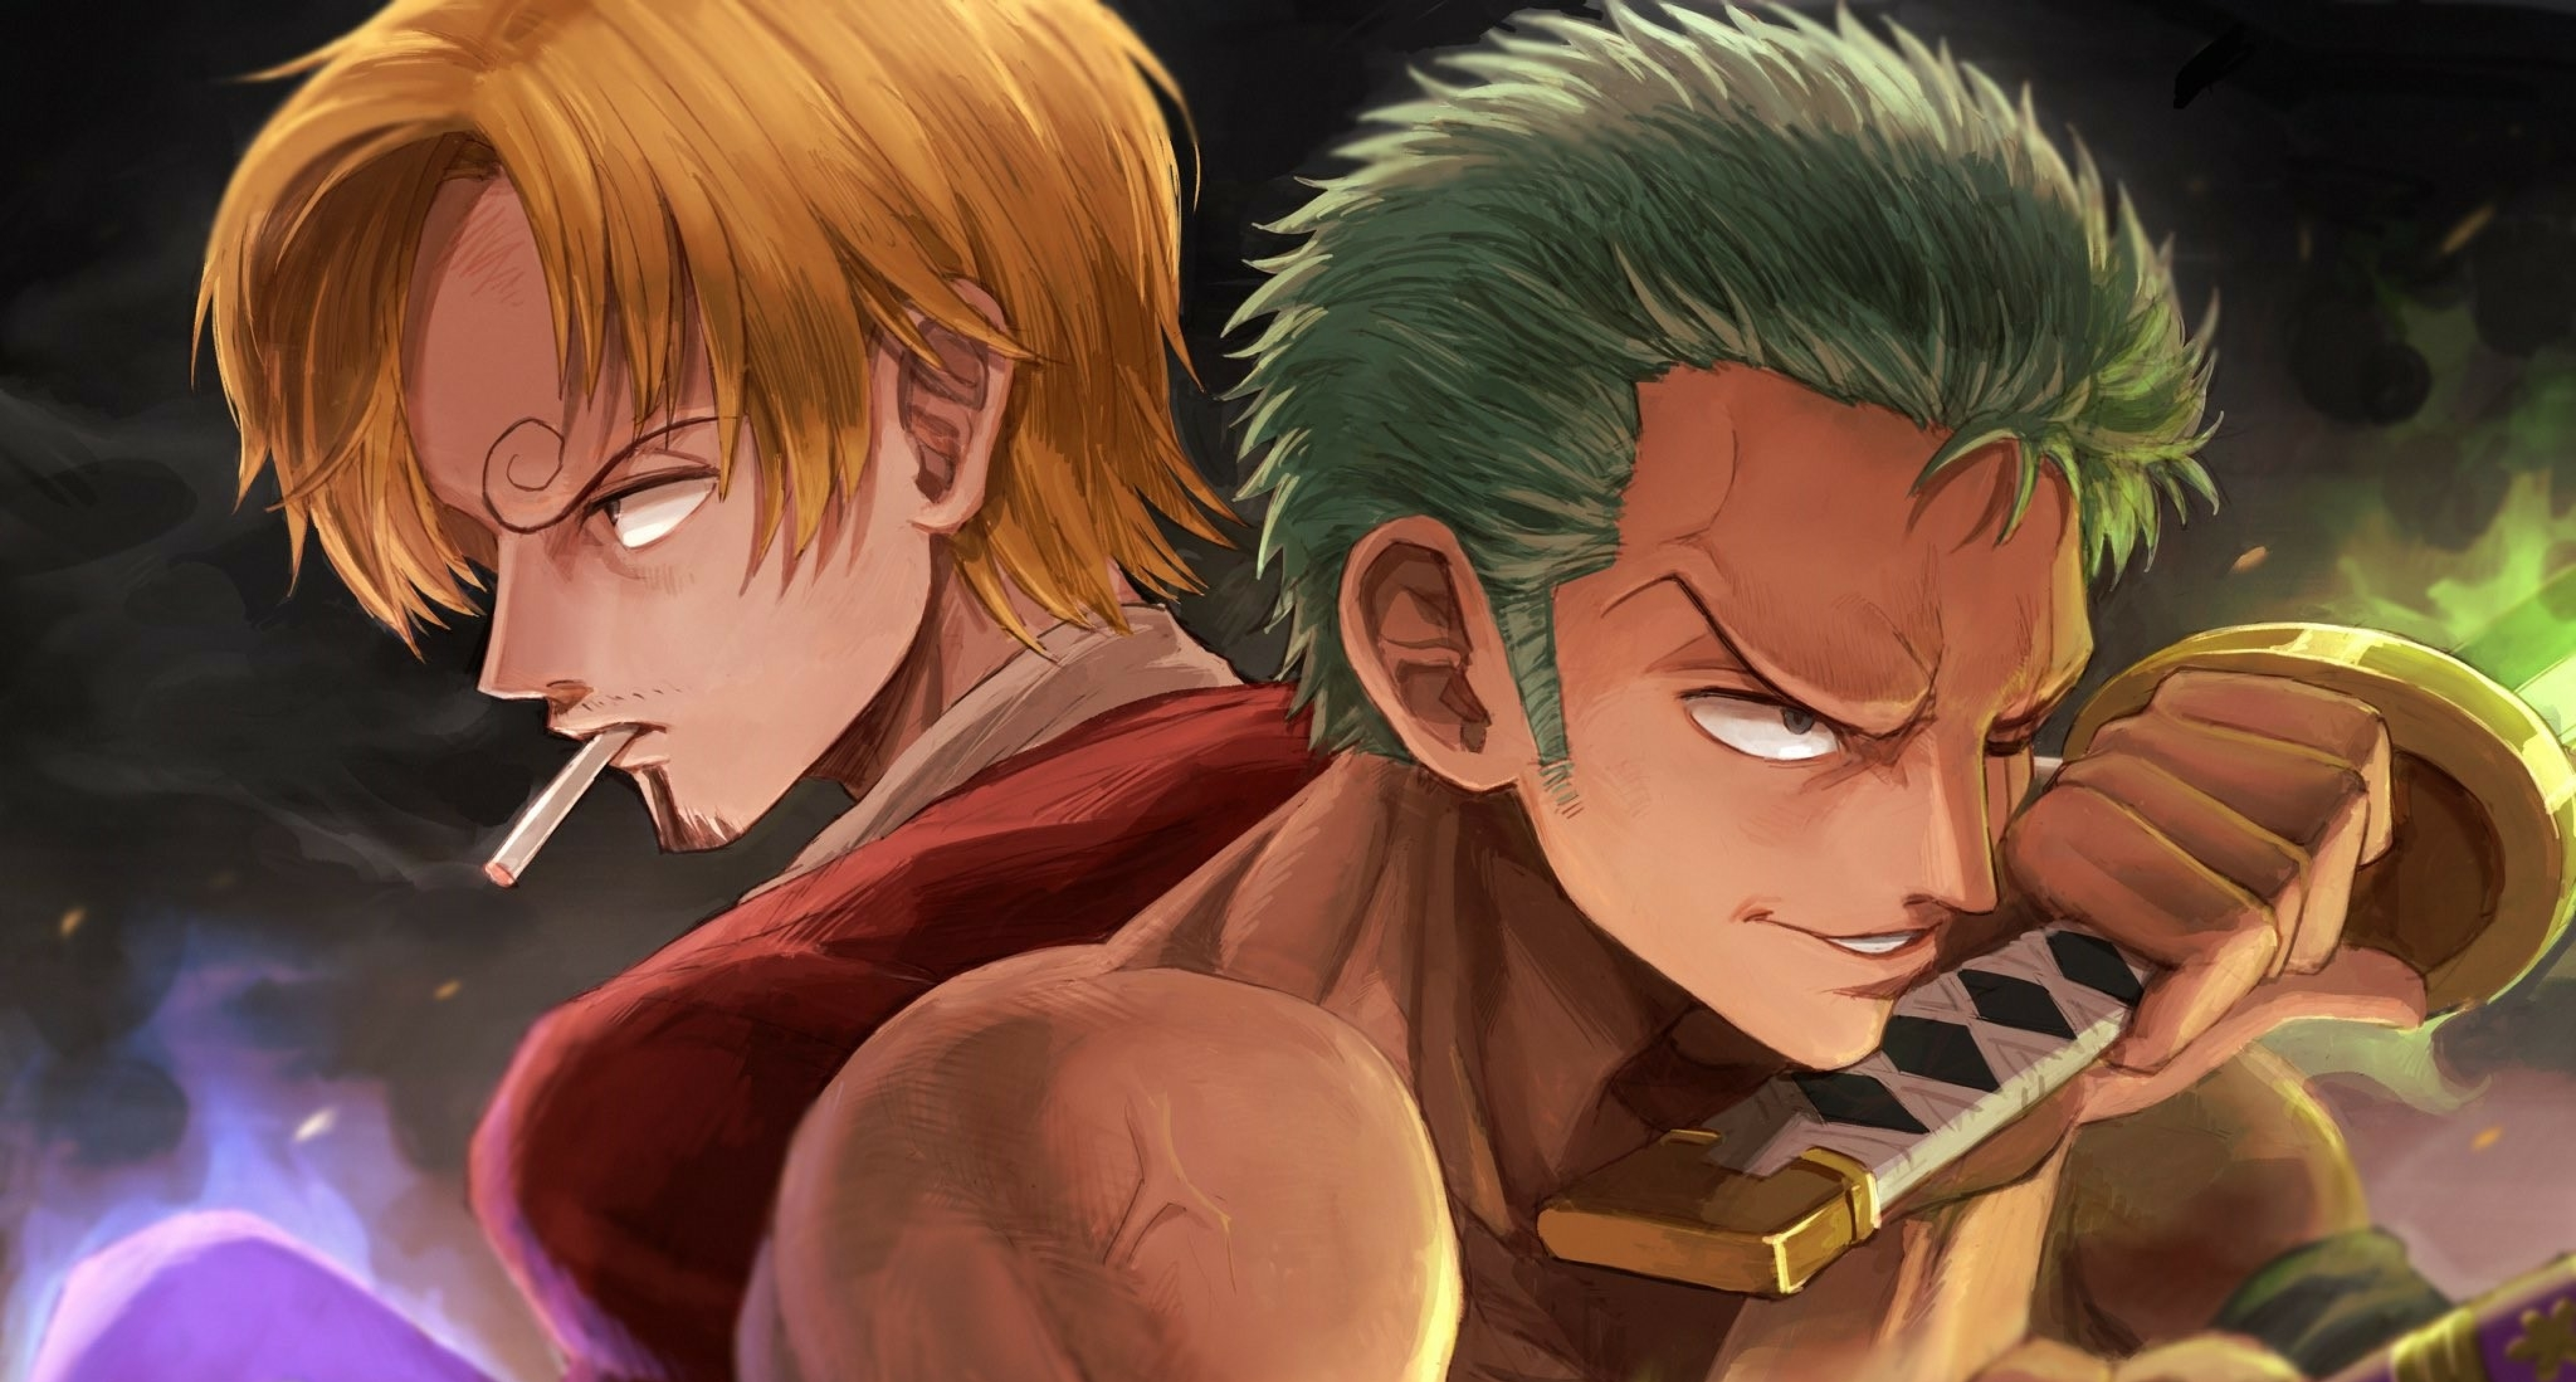 Mobile wallpaper Anime One Piece Roronoa Zoro Monkey D Luffy Sanji One  Piece 407283 download the picture for free